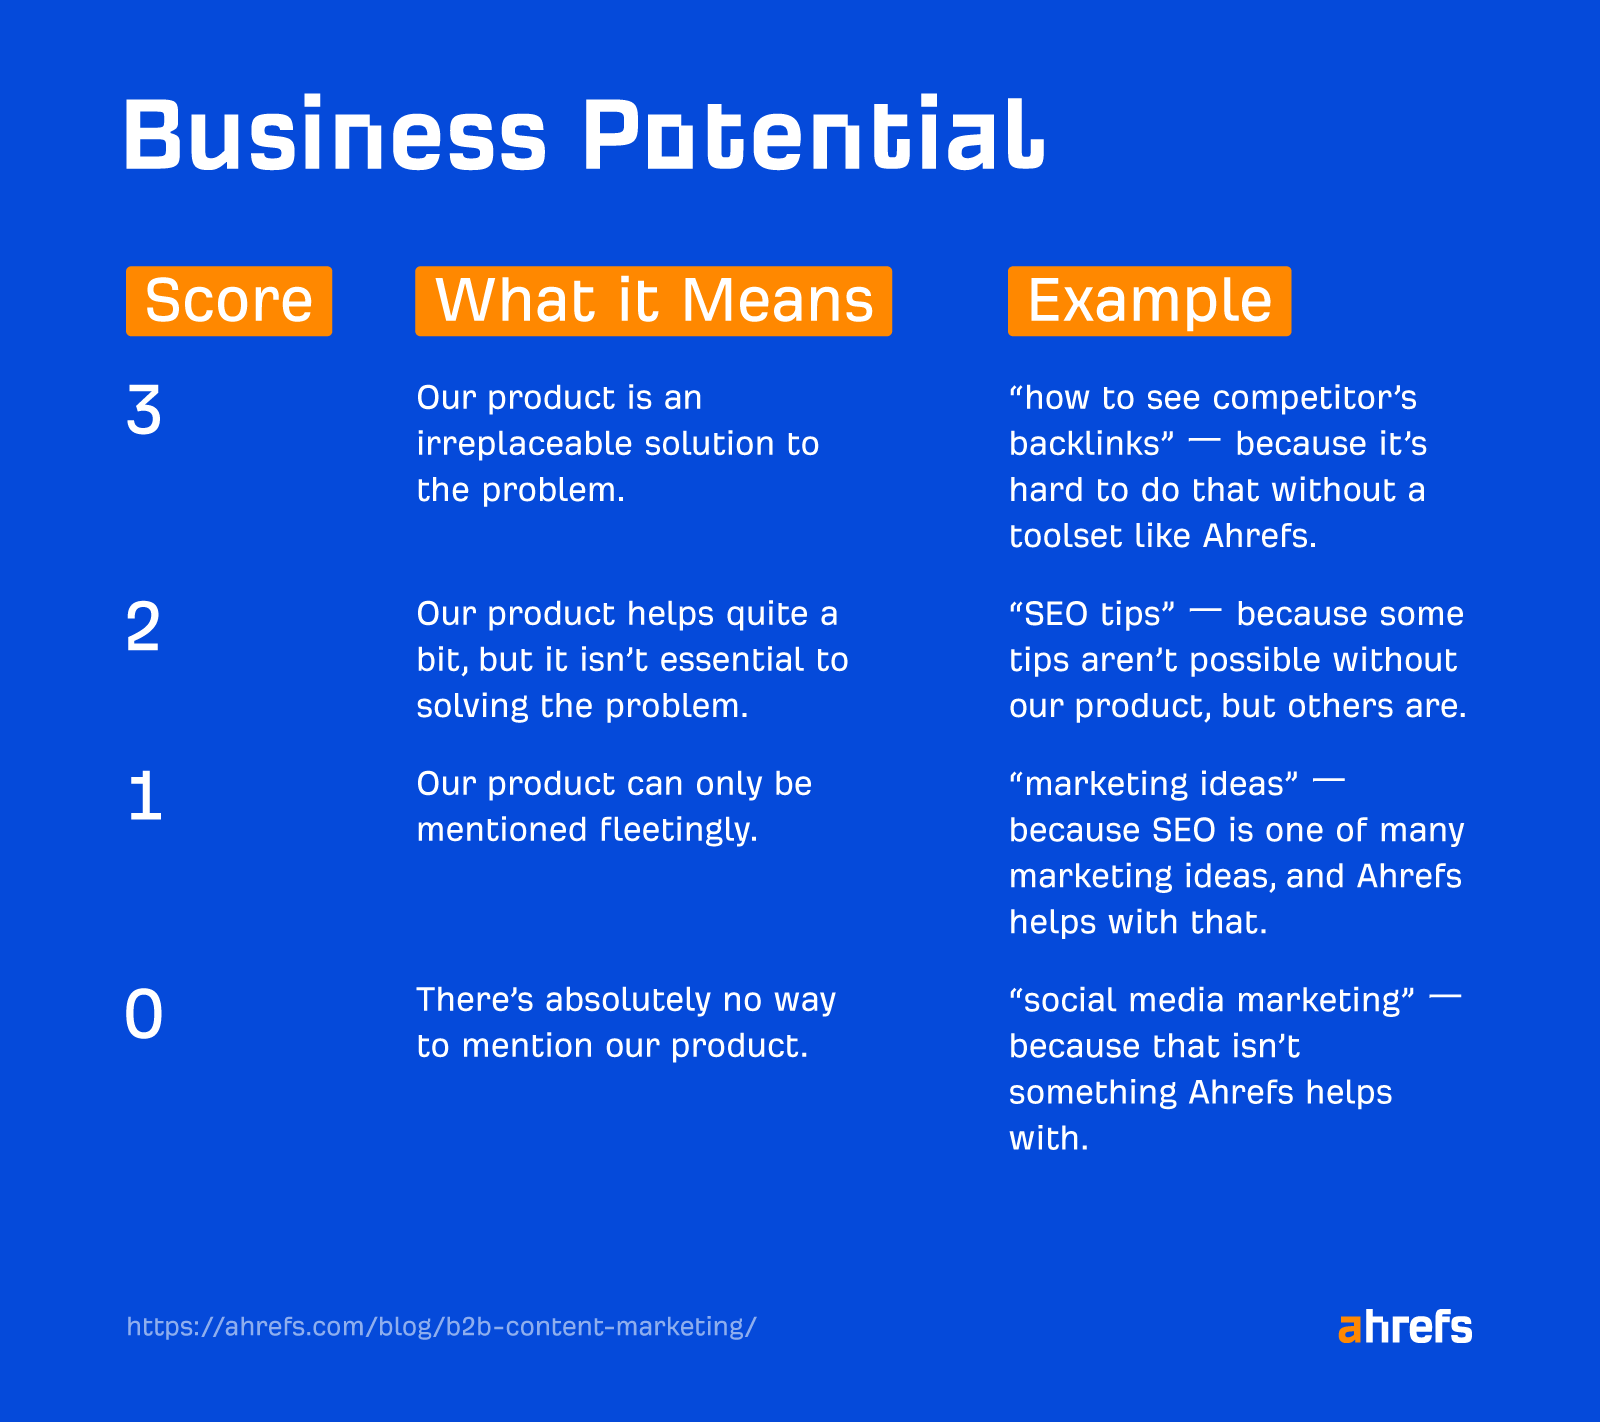 How the Ahrefs team determines the business potential of a topic
